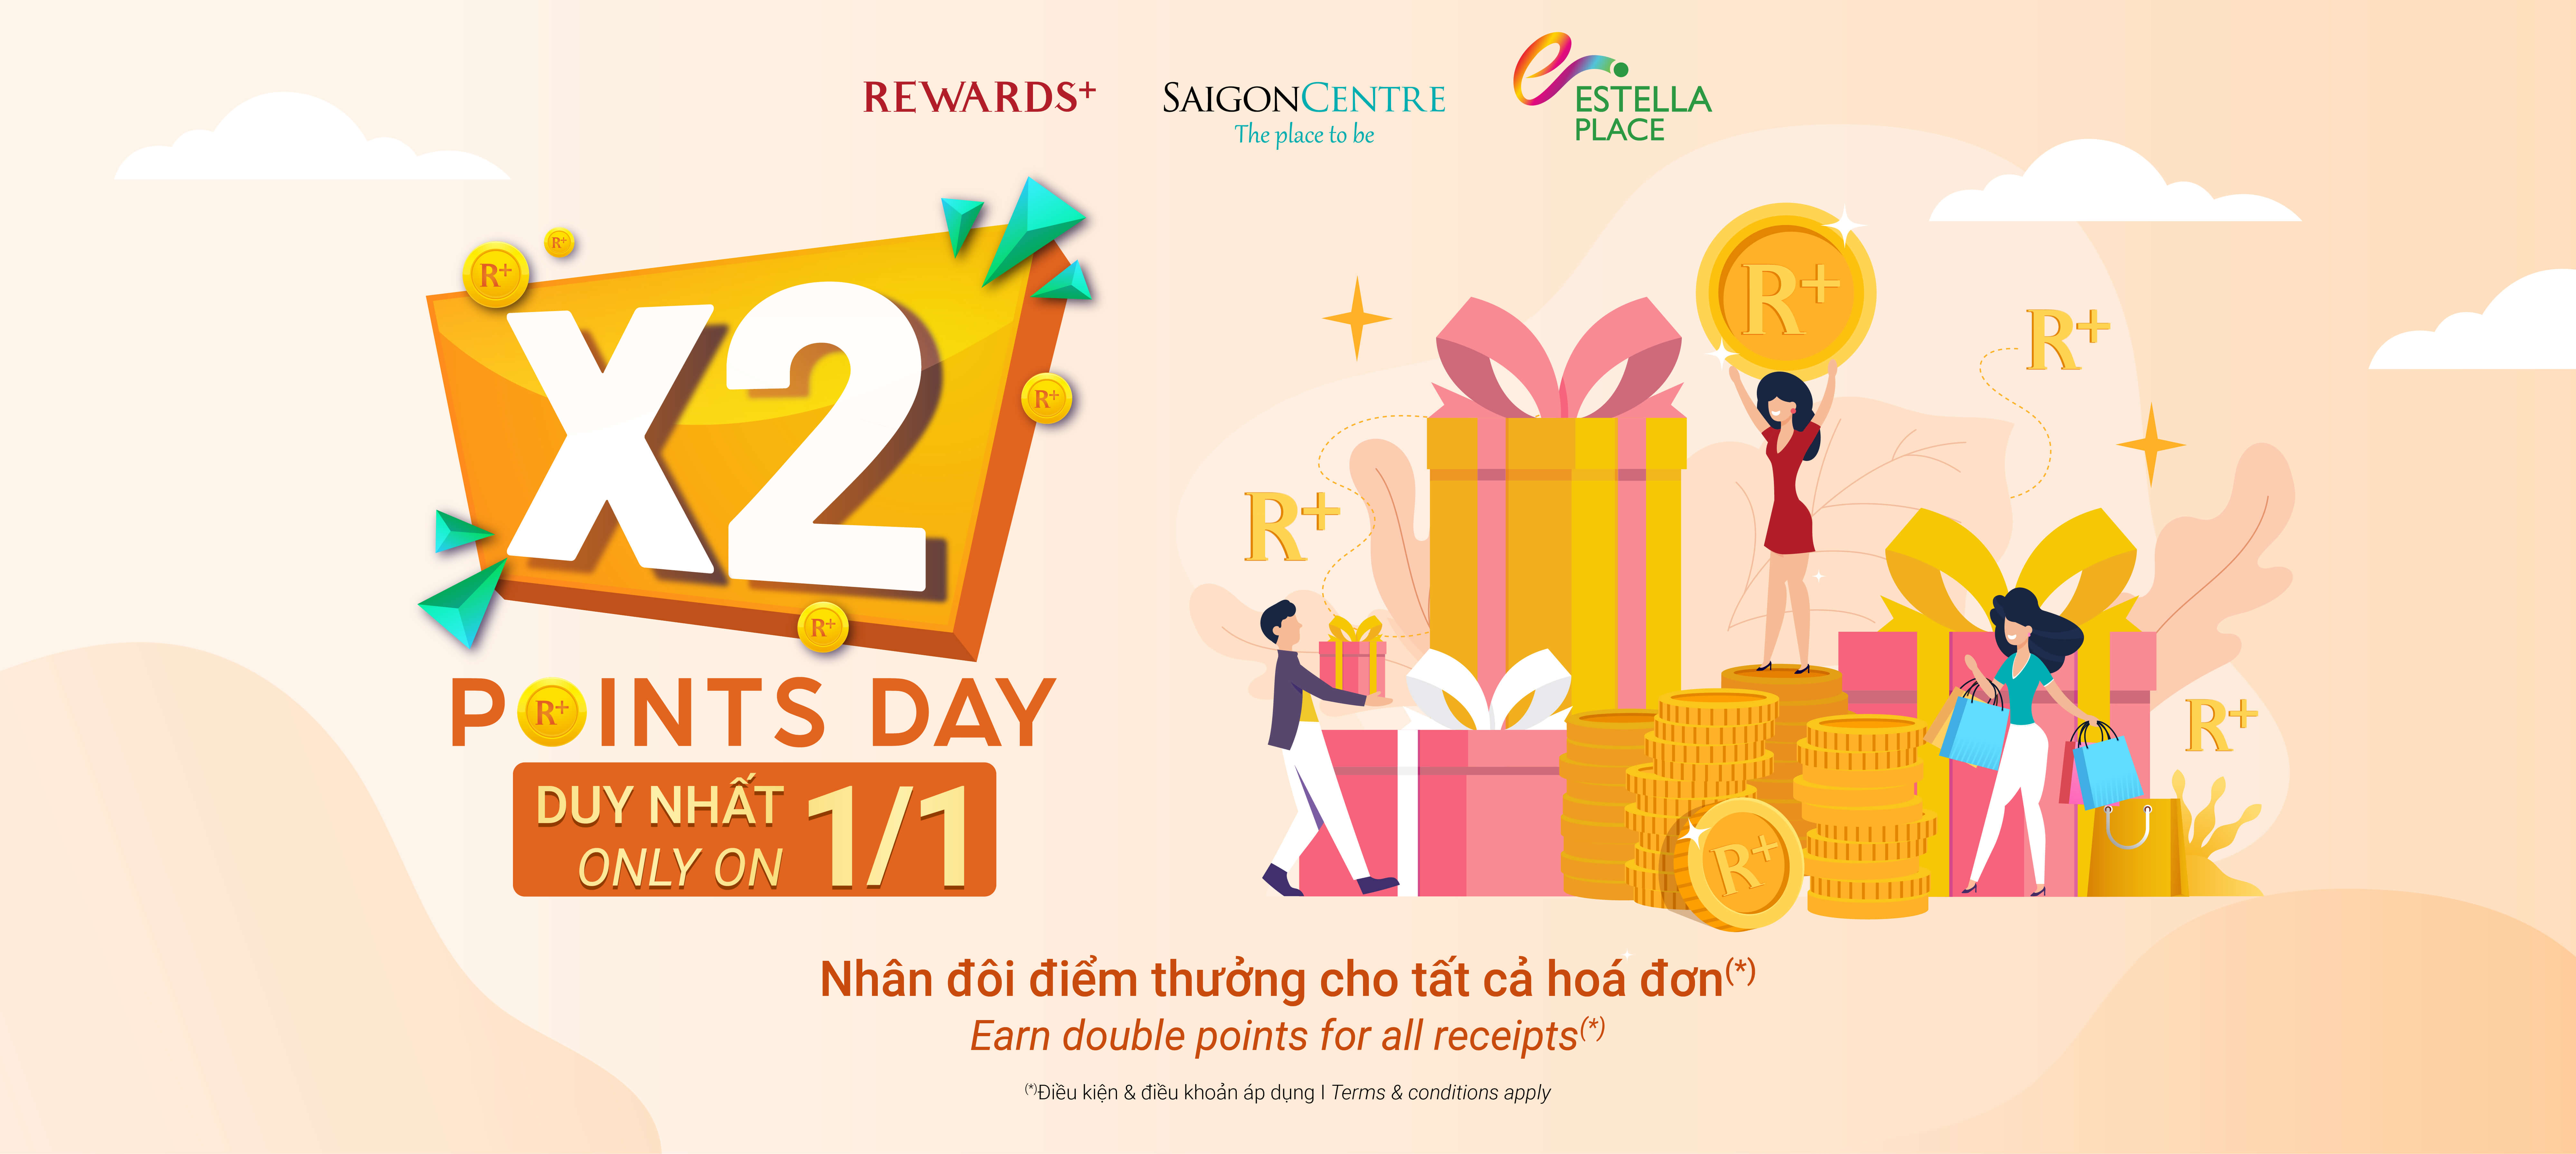 EARN DOUBLE POINTS FOR ALL RECEIPTS ON 01/01